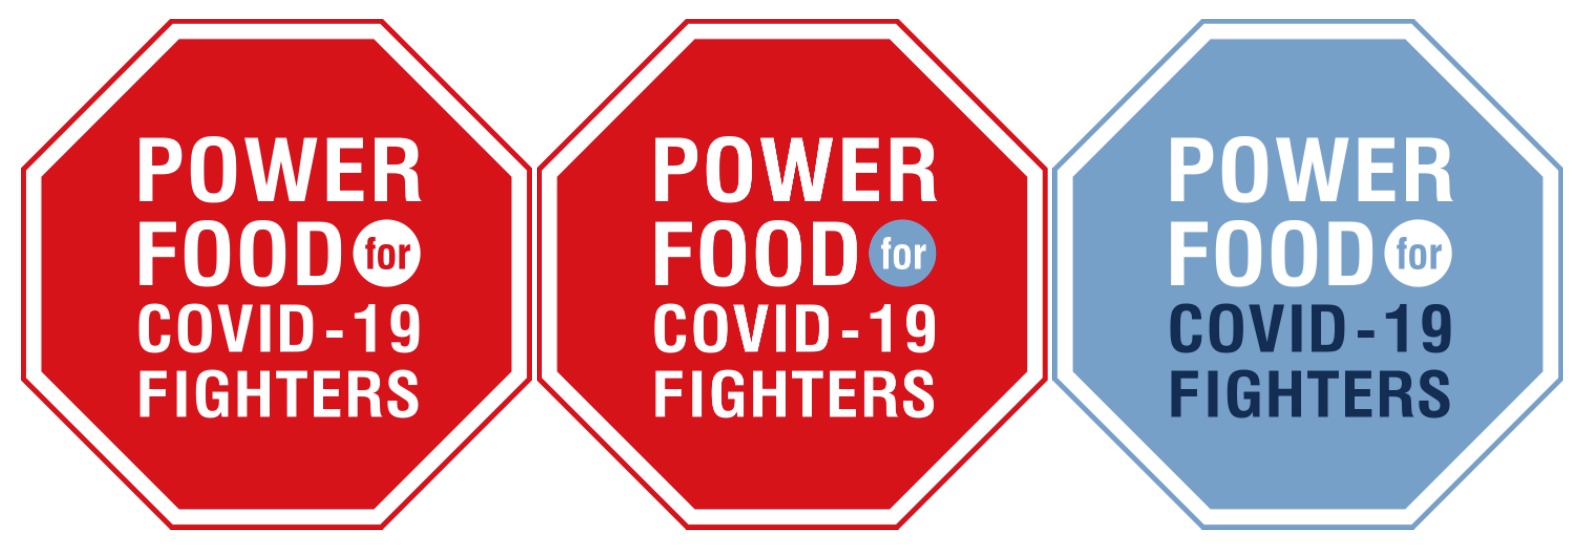 POWER FOOD for COVID-19 FIGHTERS